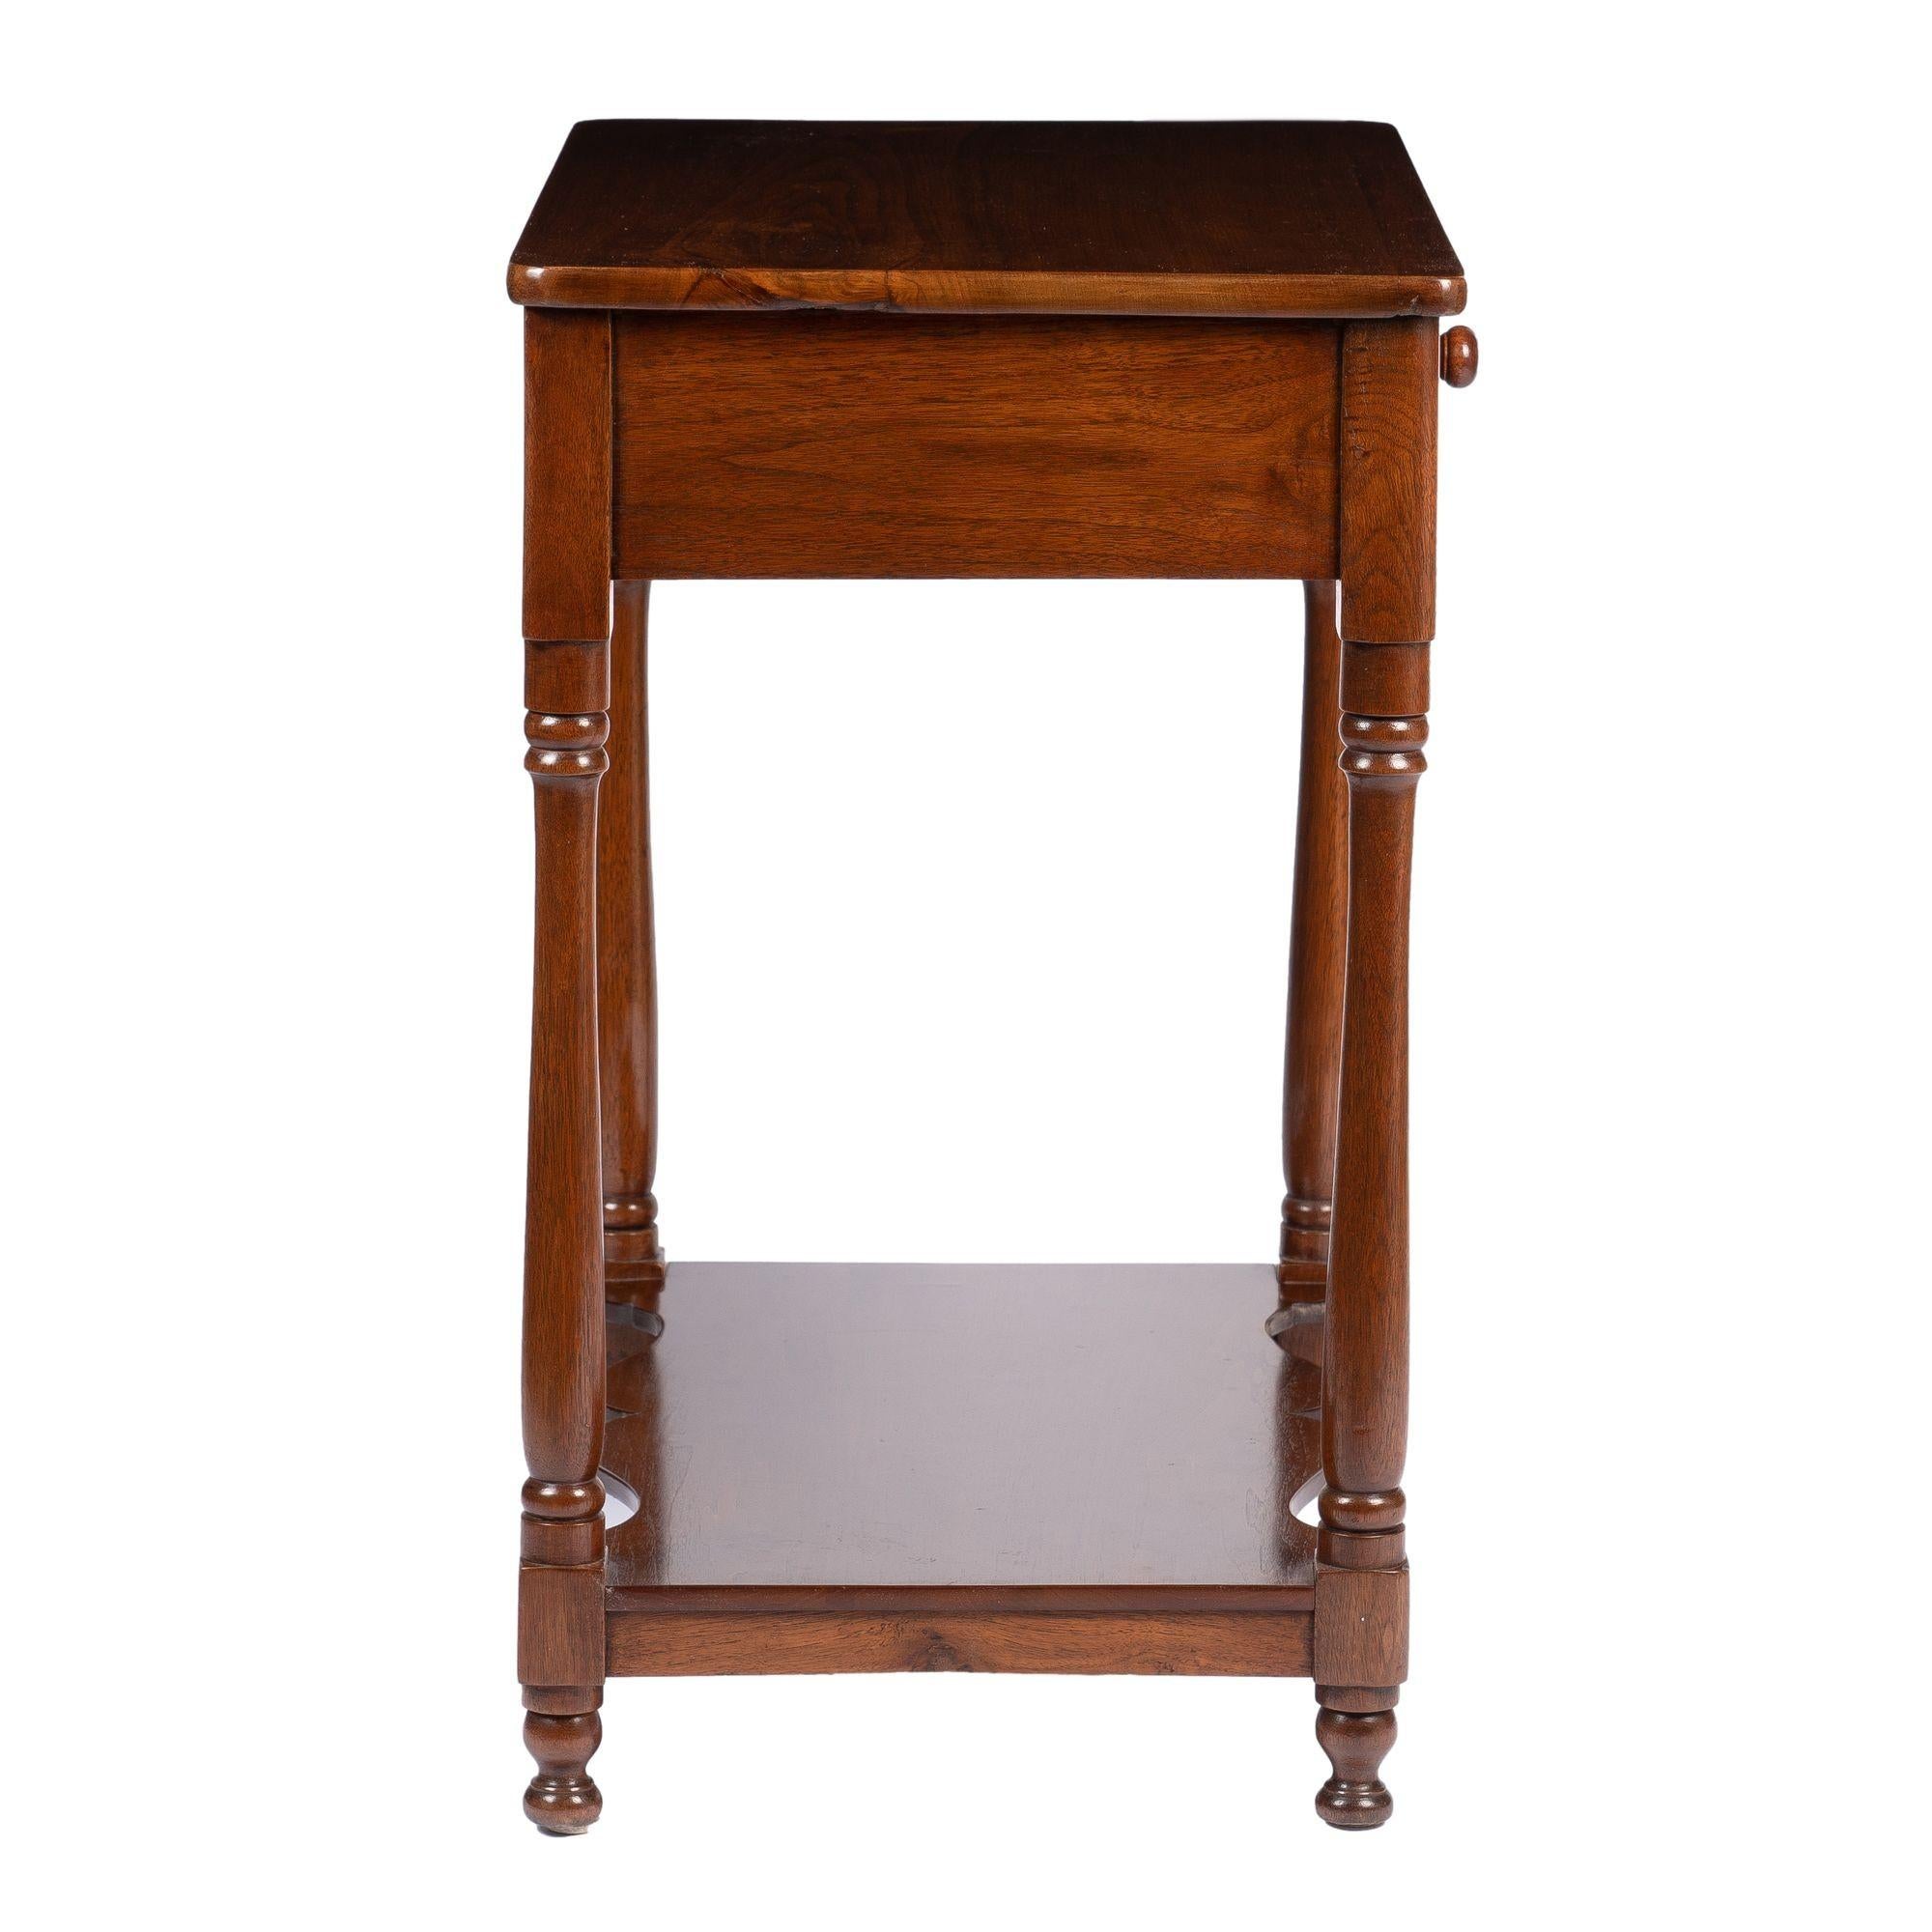 Early 19th Century American Walnut One Drawer Stand with Stretcher Shelf, 1810-20 For Sale